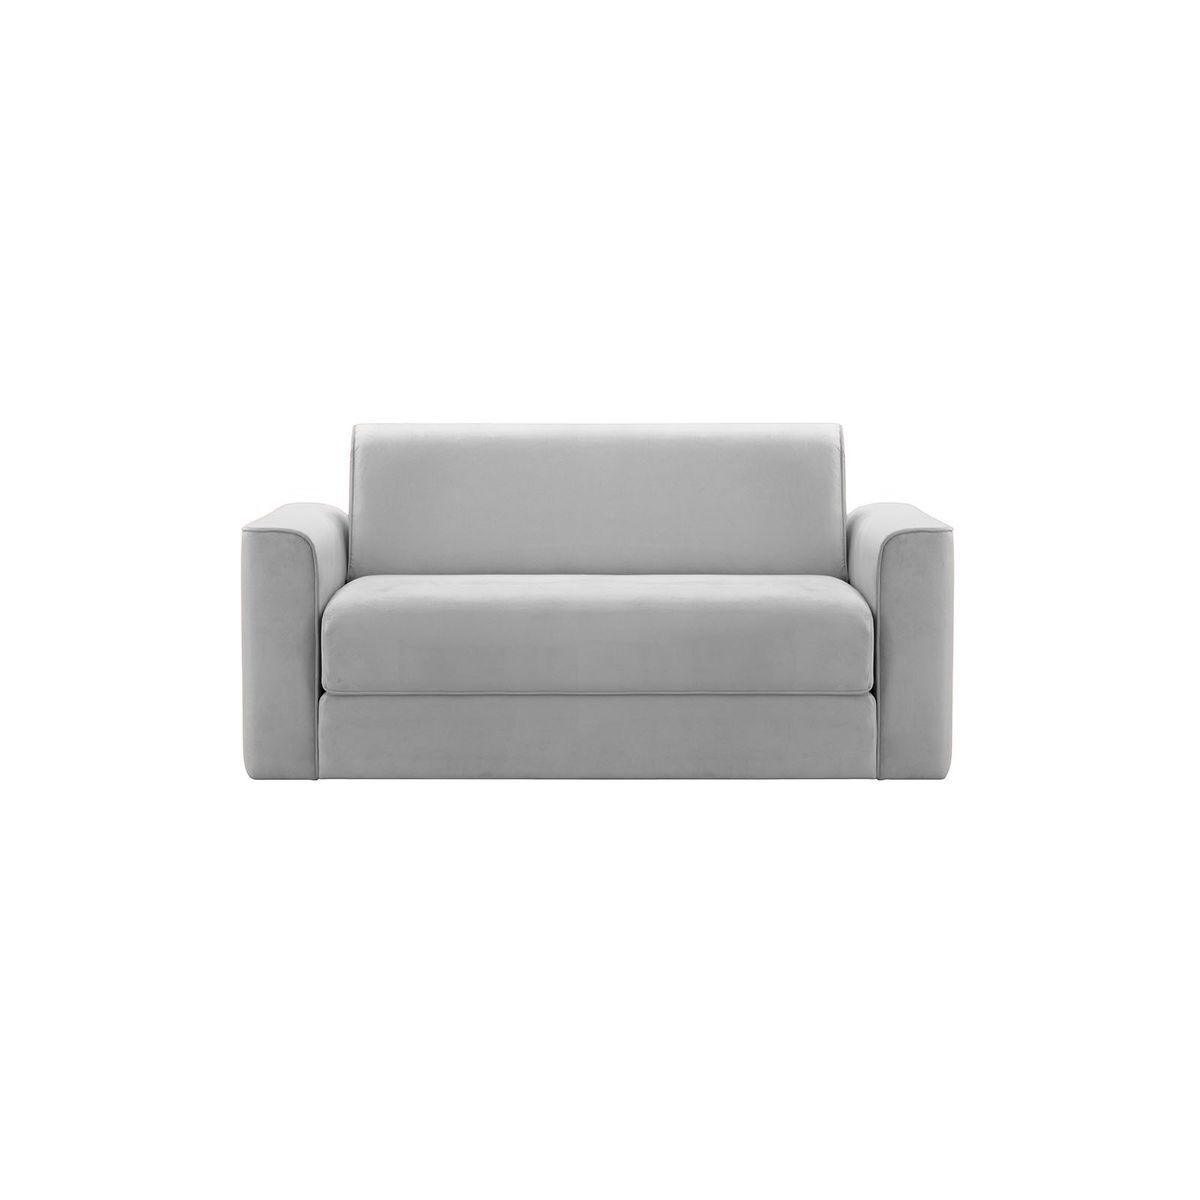 Jules 2.5 Seater Sofa Bed, dirty blue - image 1